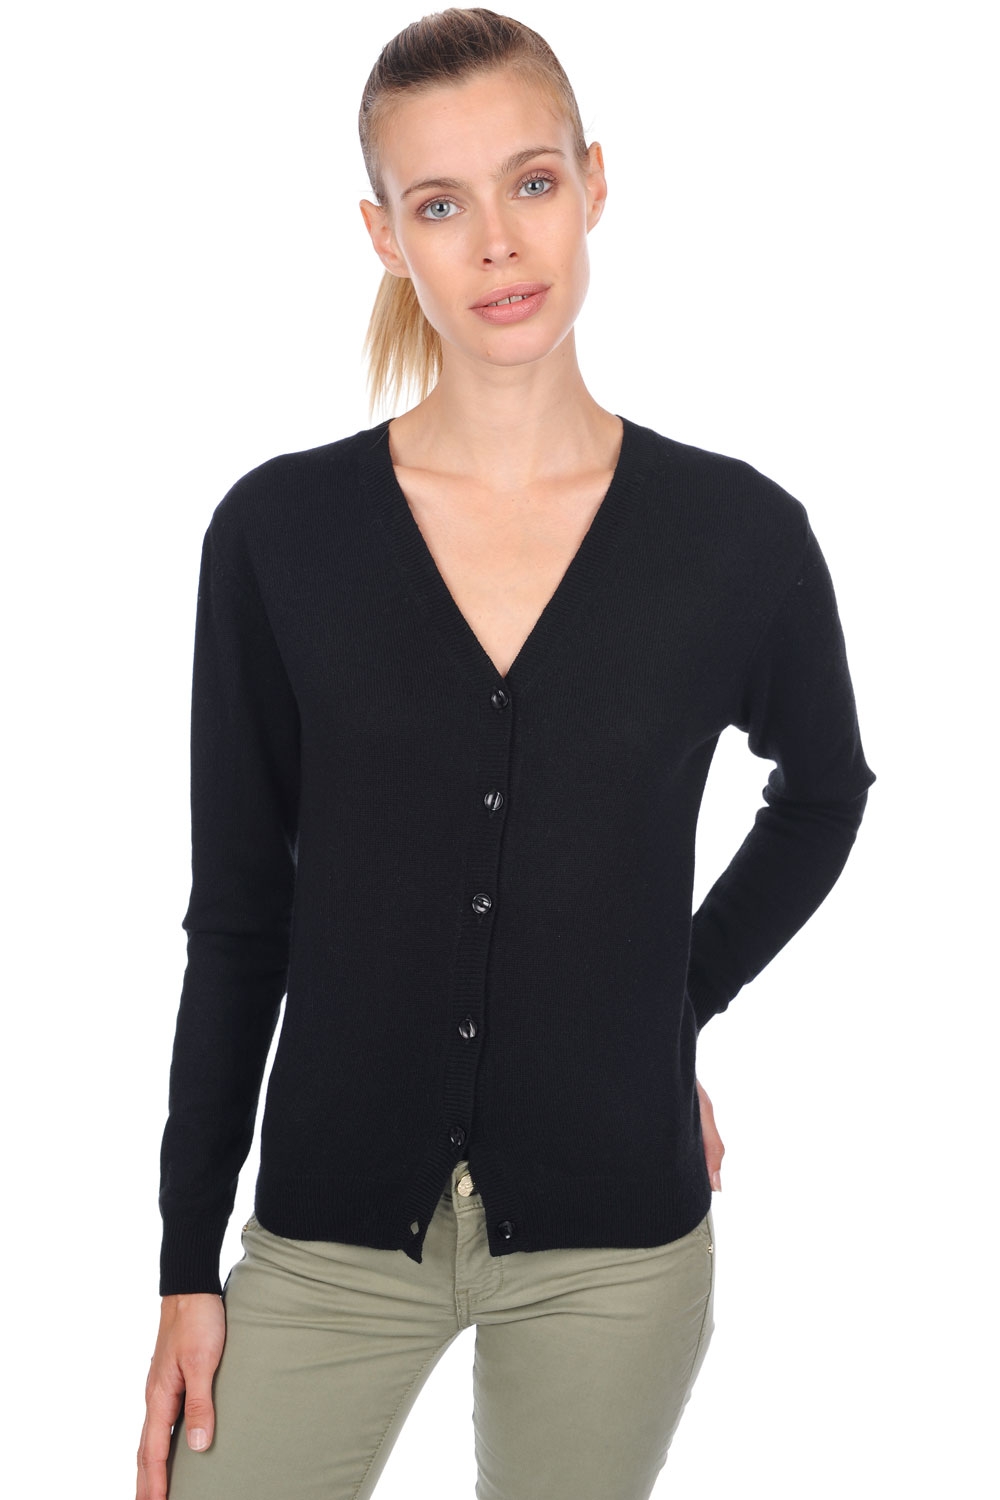 Cashmere ladies basic sweaters at low prices taline first black m